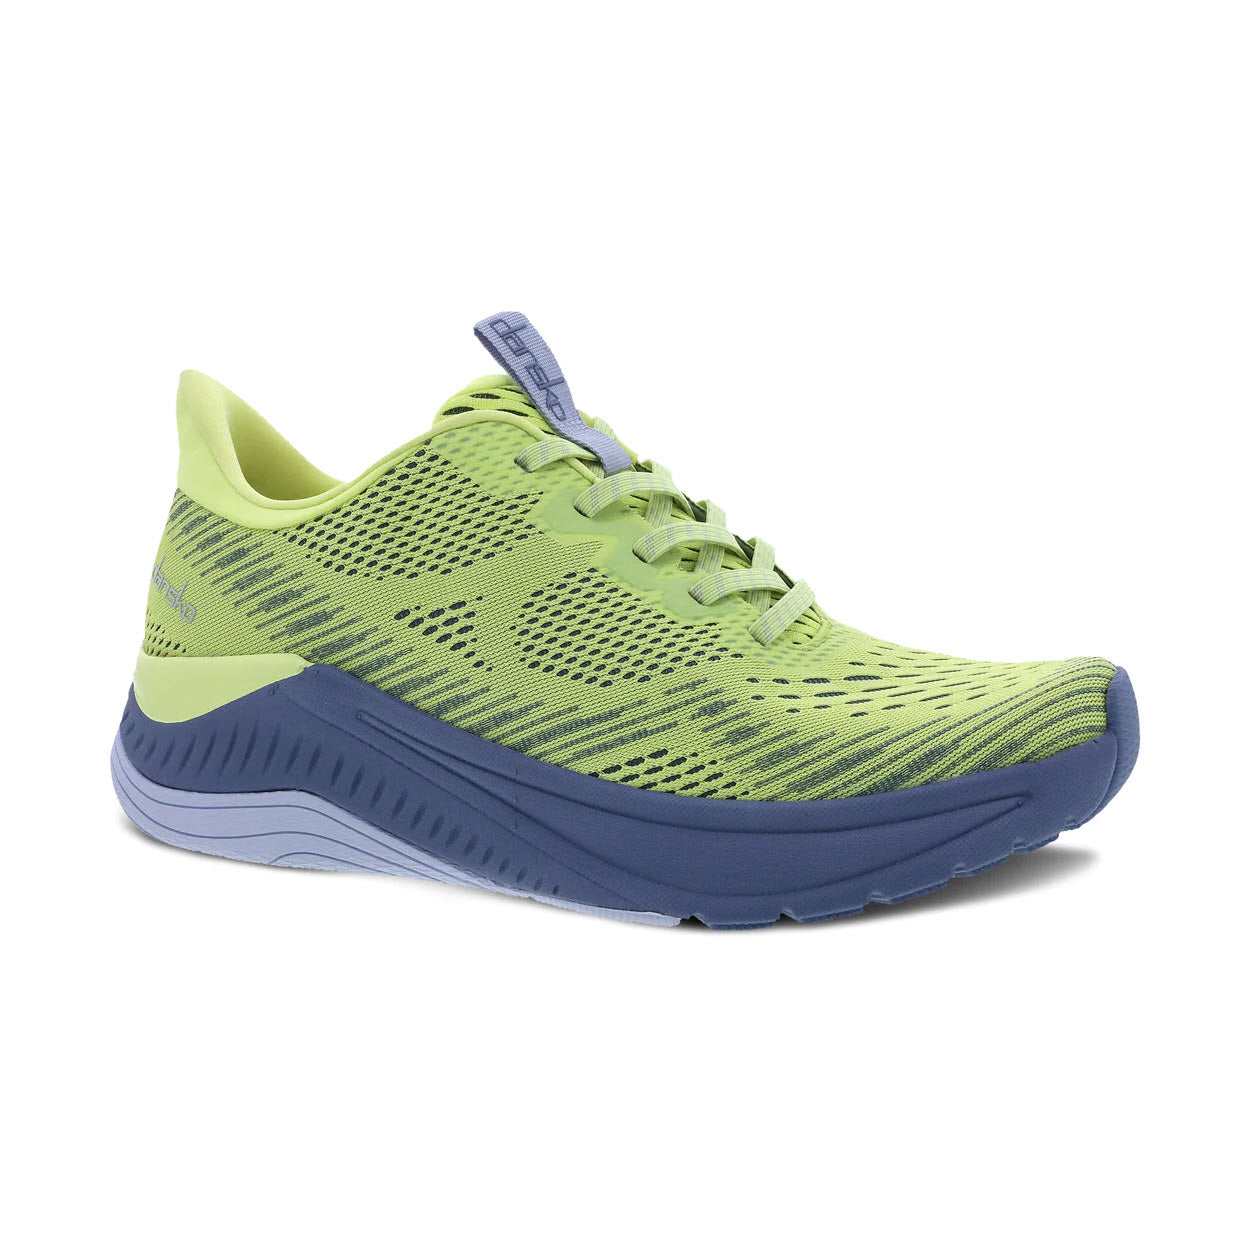 A neon green and blue Dansko walking sneaker with a breathable mesh upper and thick, cushioned sole, displayed on a white background.